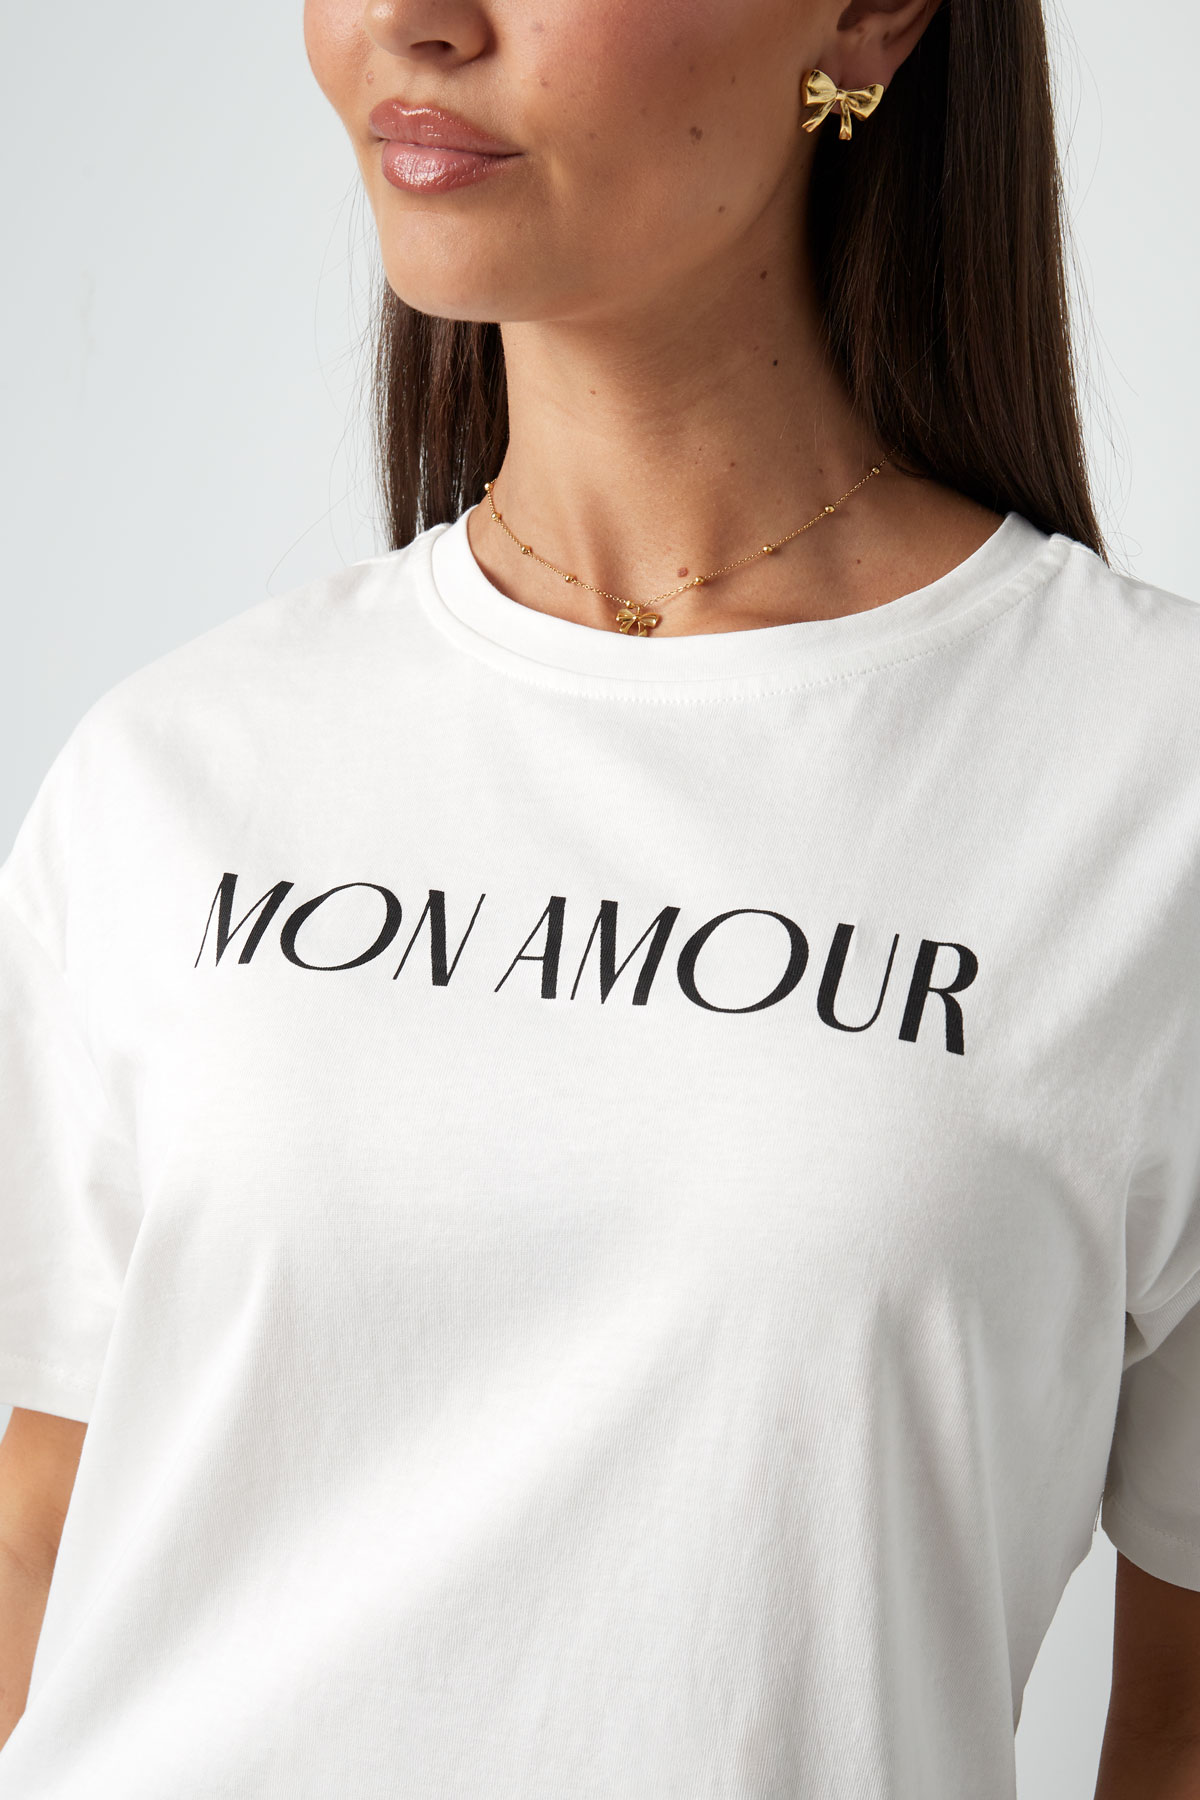 T-shirt mon amour - black and white h5 Picture5